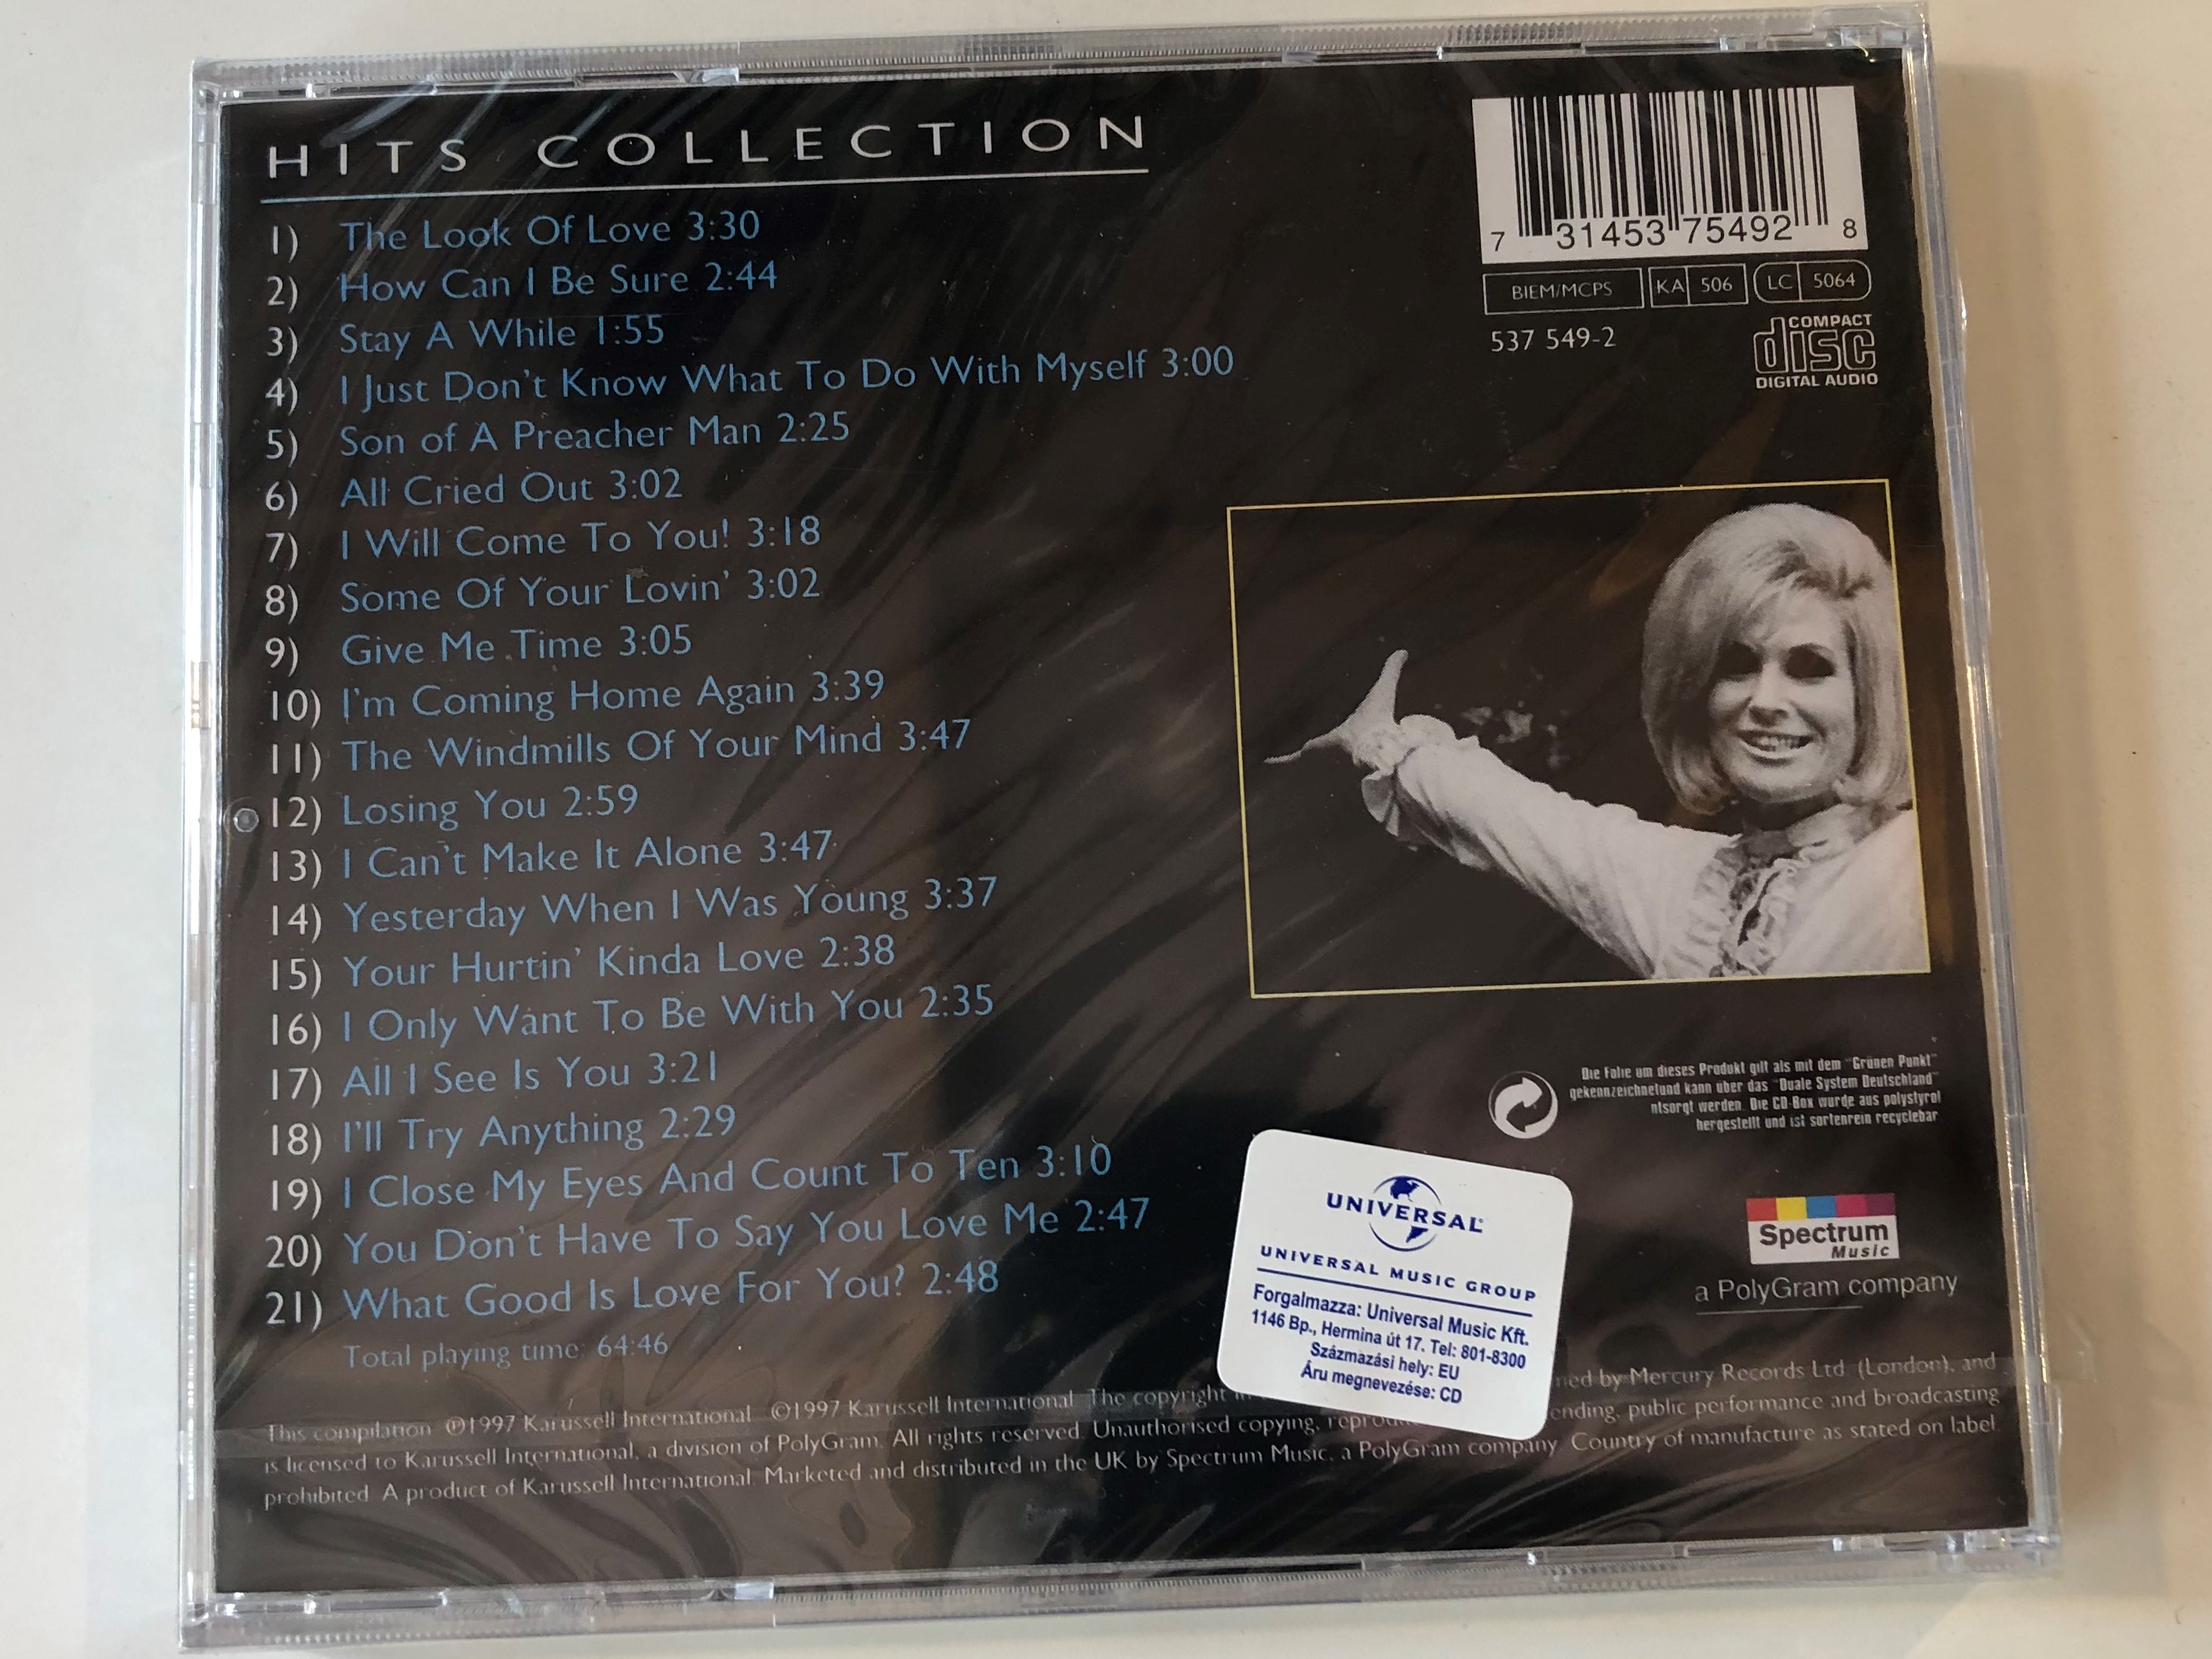 dusty-springfield-hits-collection-featuring-losing-you-the-look-of-love-son-of-a-preacher-man-windmills-of-your-mind-i-only-want-to-be-with-you-you-don-t-have-to-say-you-love-me-spect.jpg